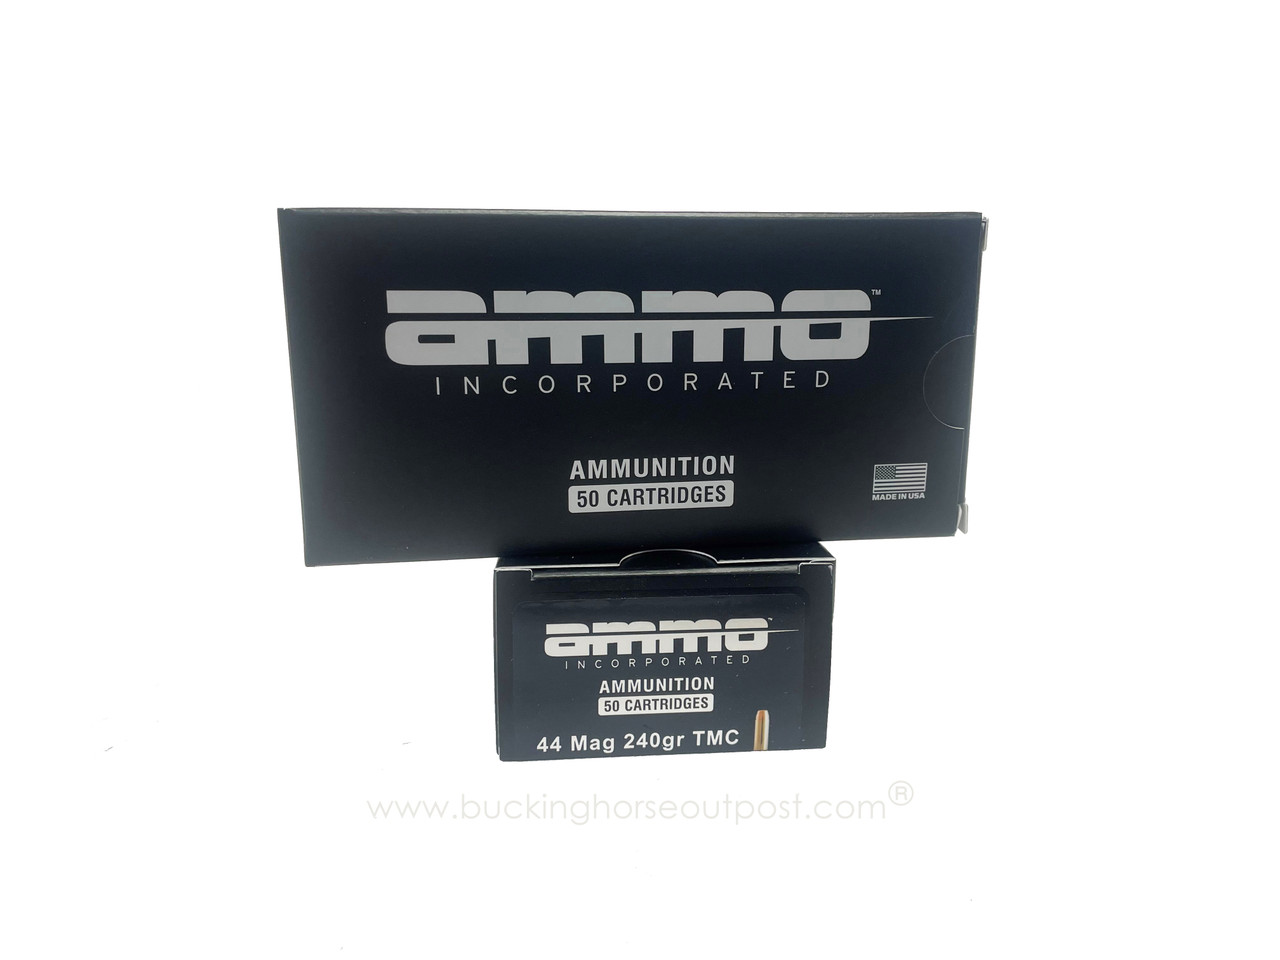 Ammo Inc. Signature .44 Remington Magnum 240 Grain Total Metal Coating 50rds Per Box (44240TMC-A20)- FREE SHIPPING ON ORDERS OVER $175